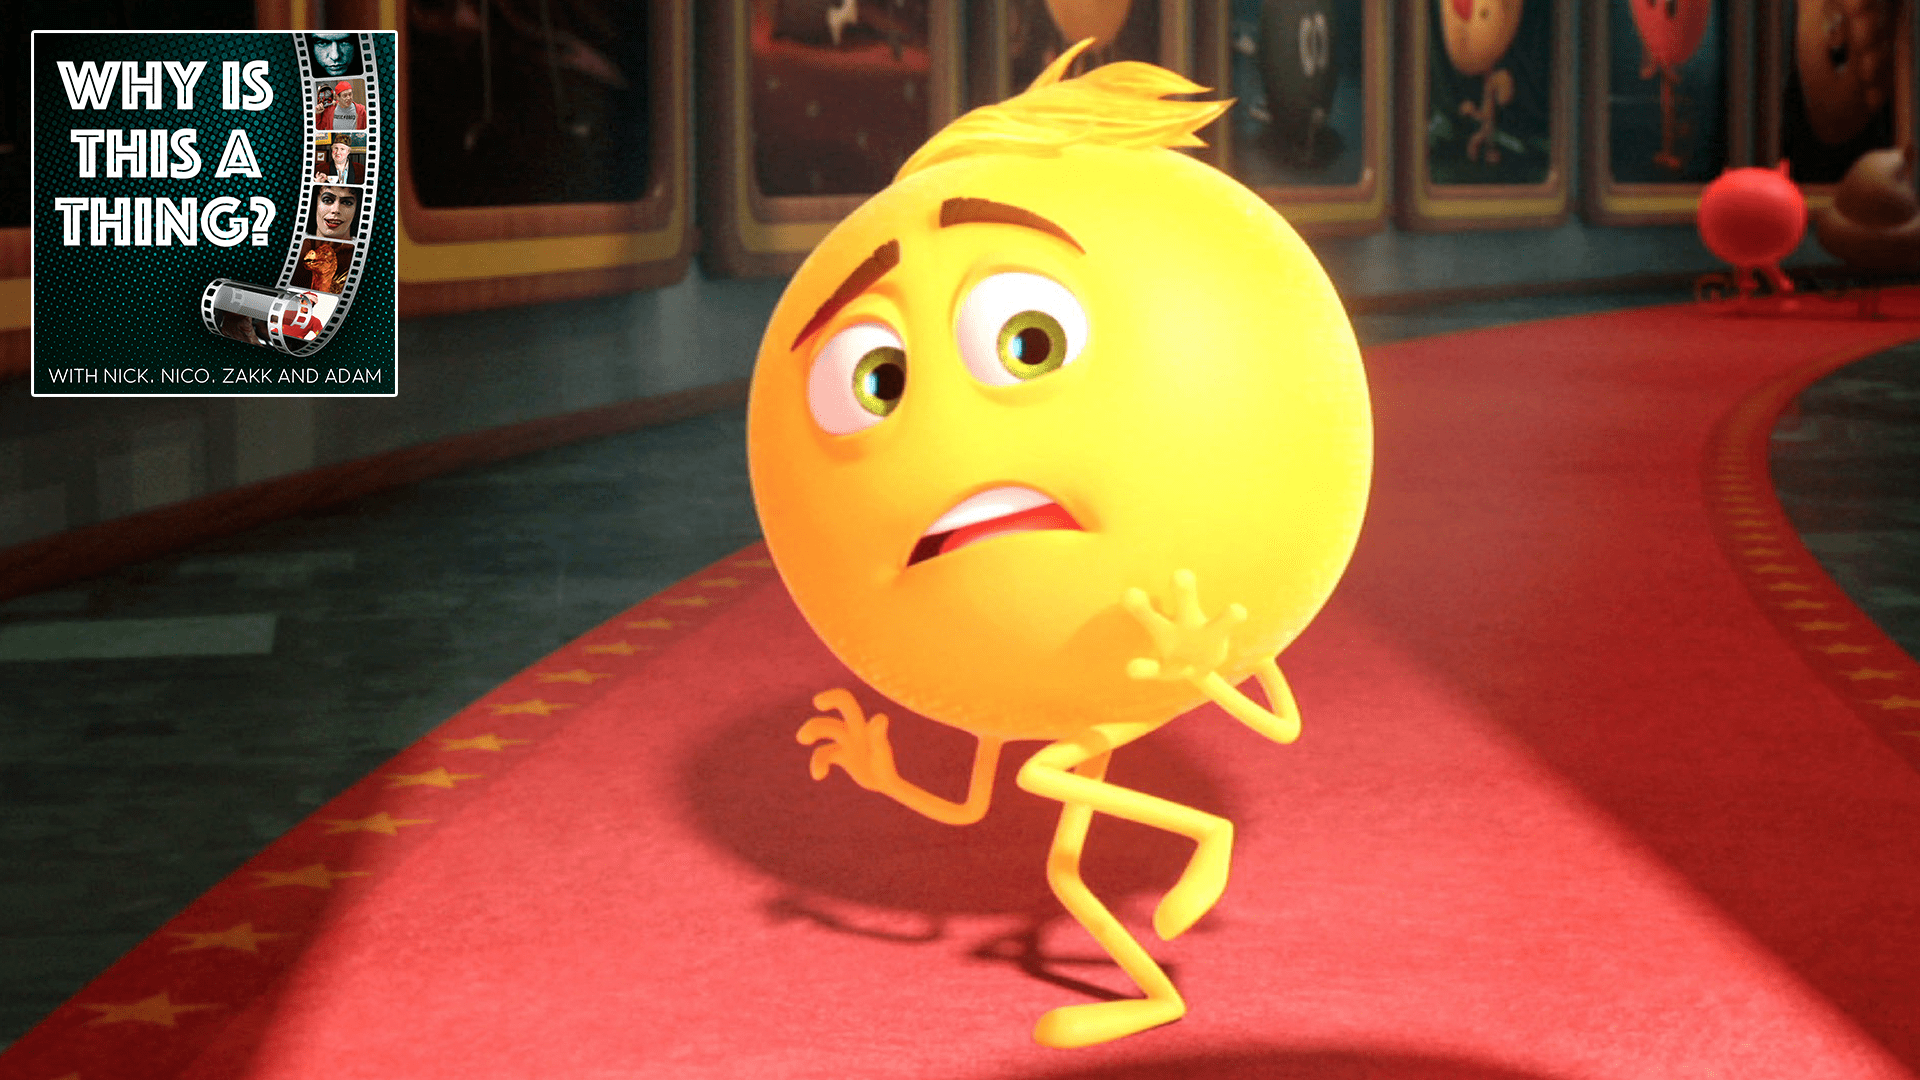 The Emoji Movie. Too Many Thoughts